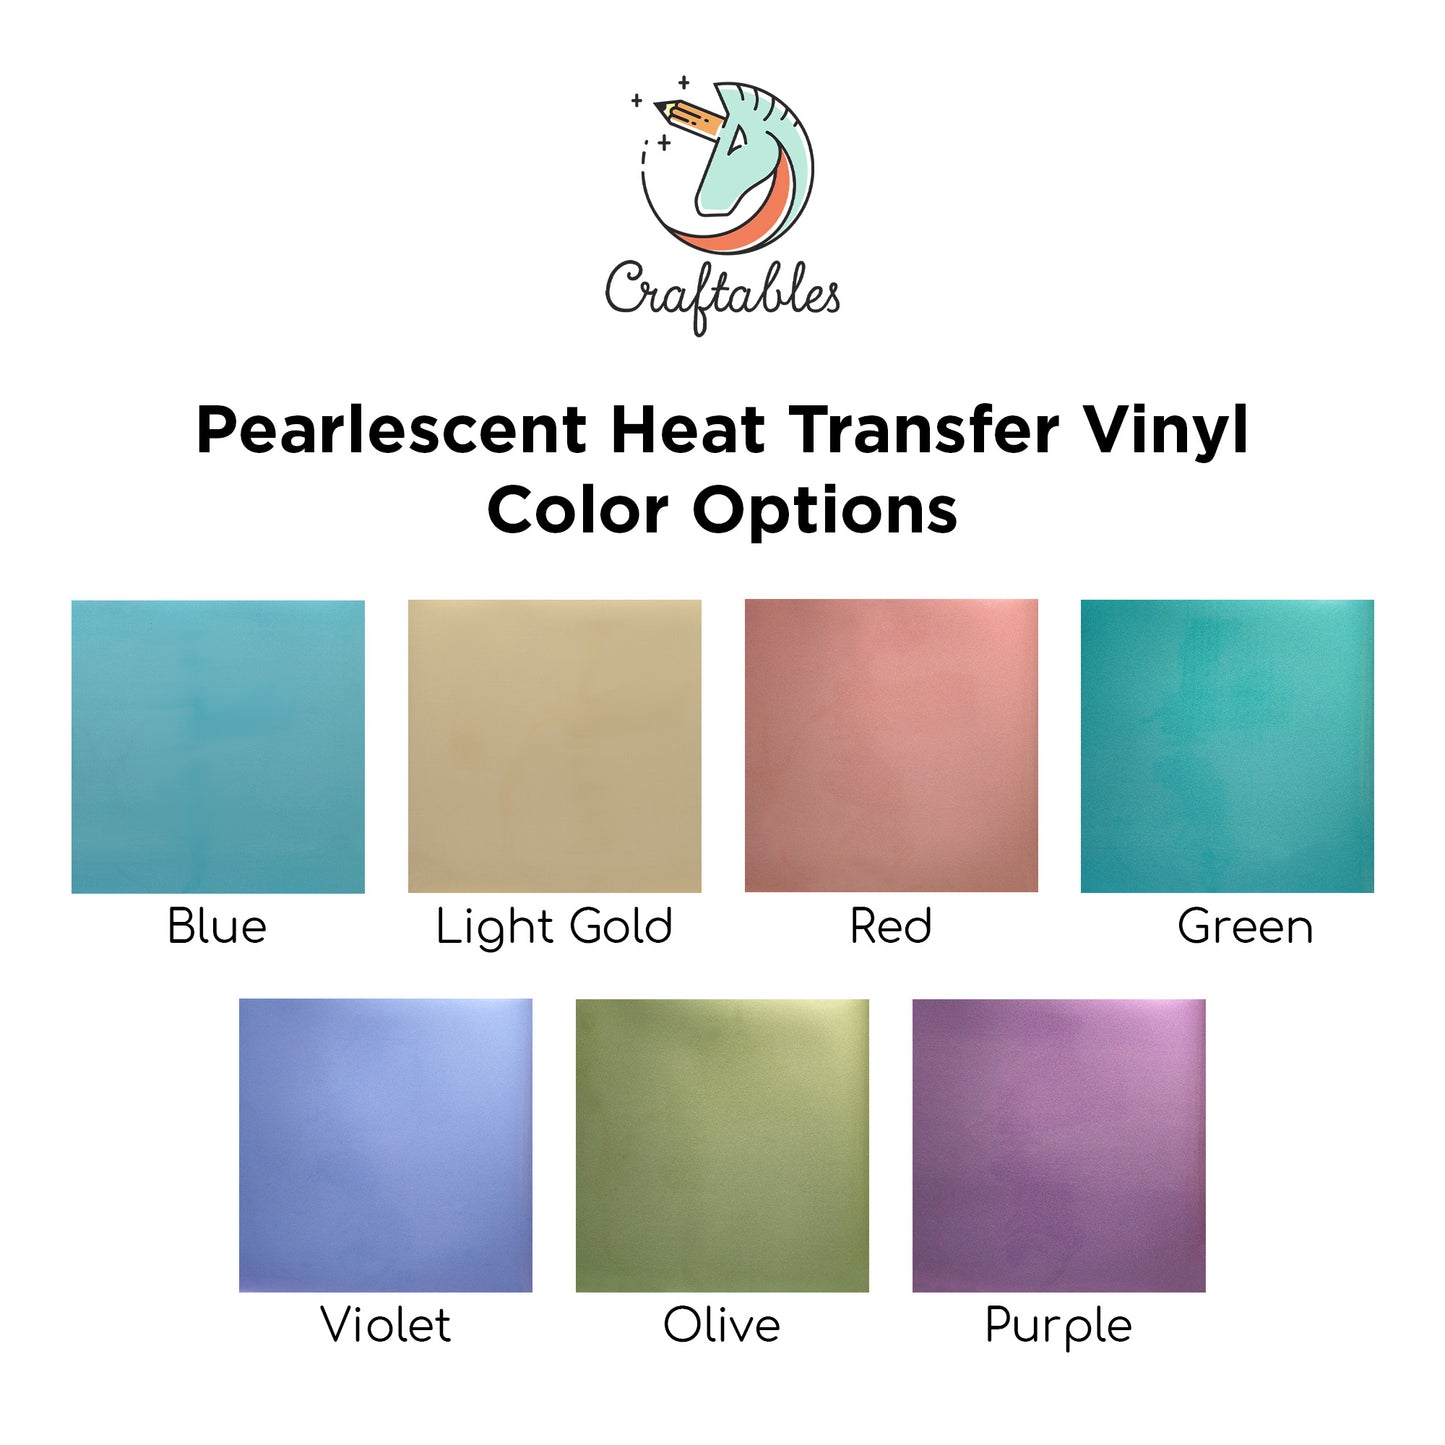 Light Gold Pearlescent Heat Transfer Vinyl Sheets By Craftables